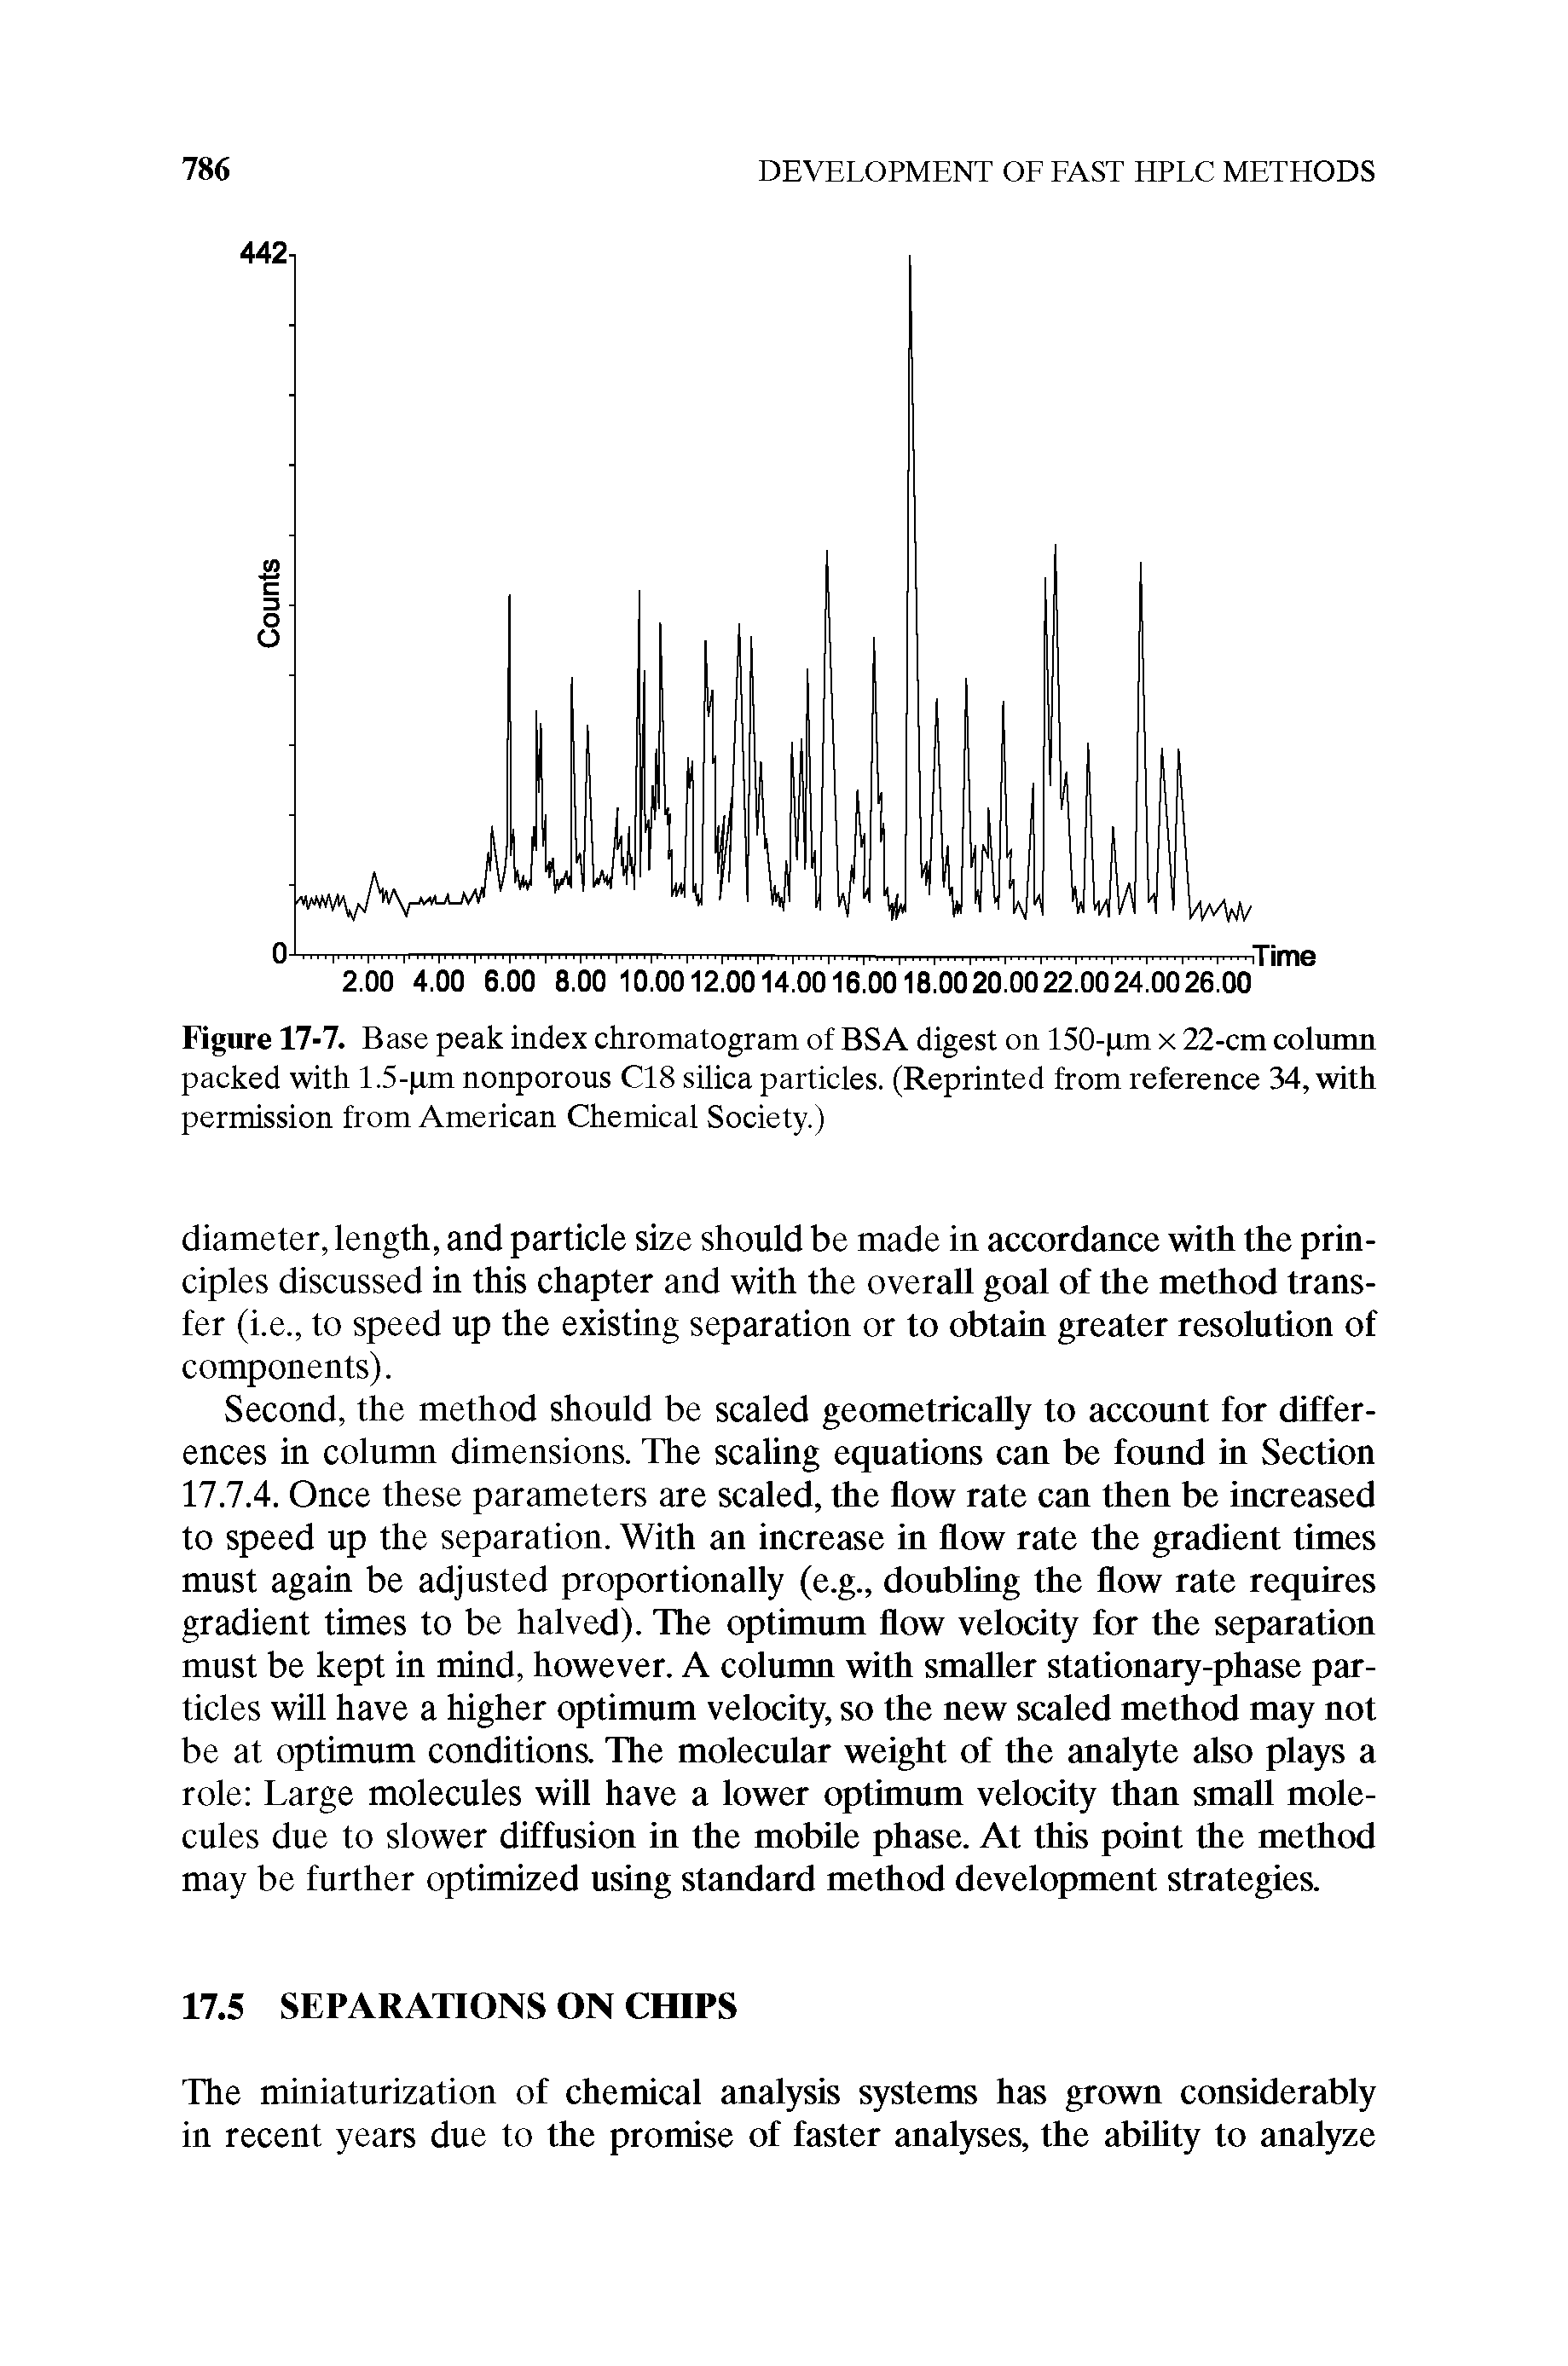 Figure 17-7. Base peak index chromatogram of BSA digest on 150- xm x 22-cm column packed with 1.5- xm nonporous CIS silica particles. (Reprinted from reference 34, with permission from American Chemical Society.)...